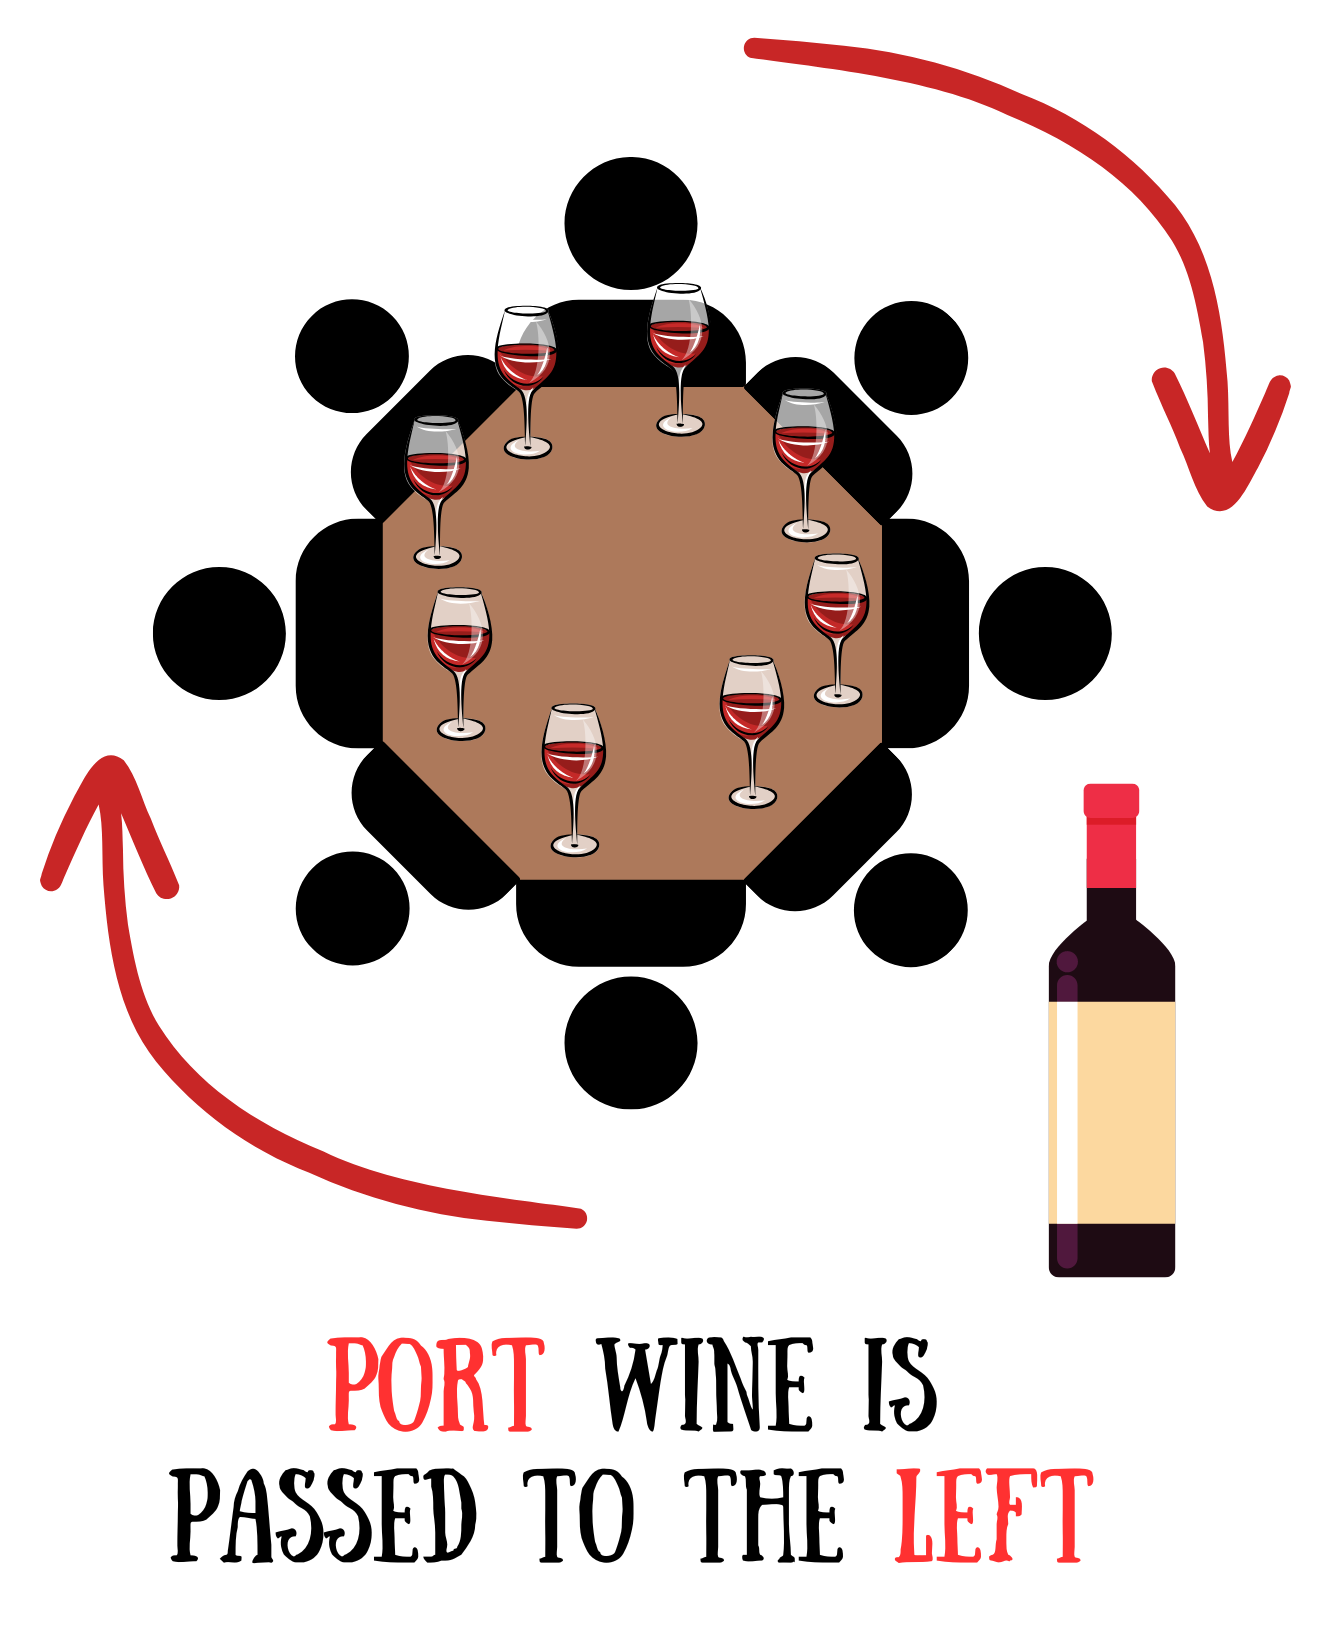 Port and starboard - port wine is passed to the left